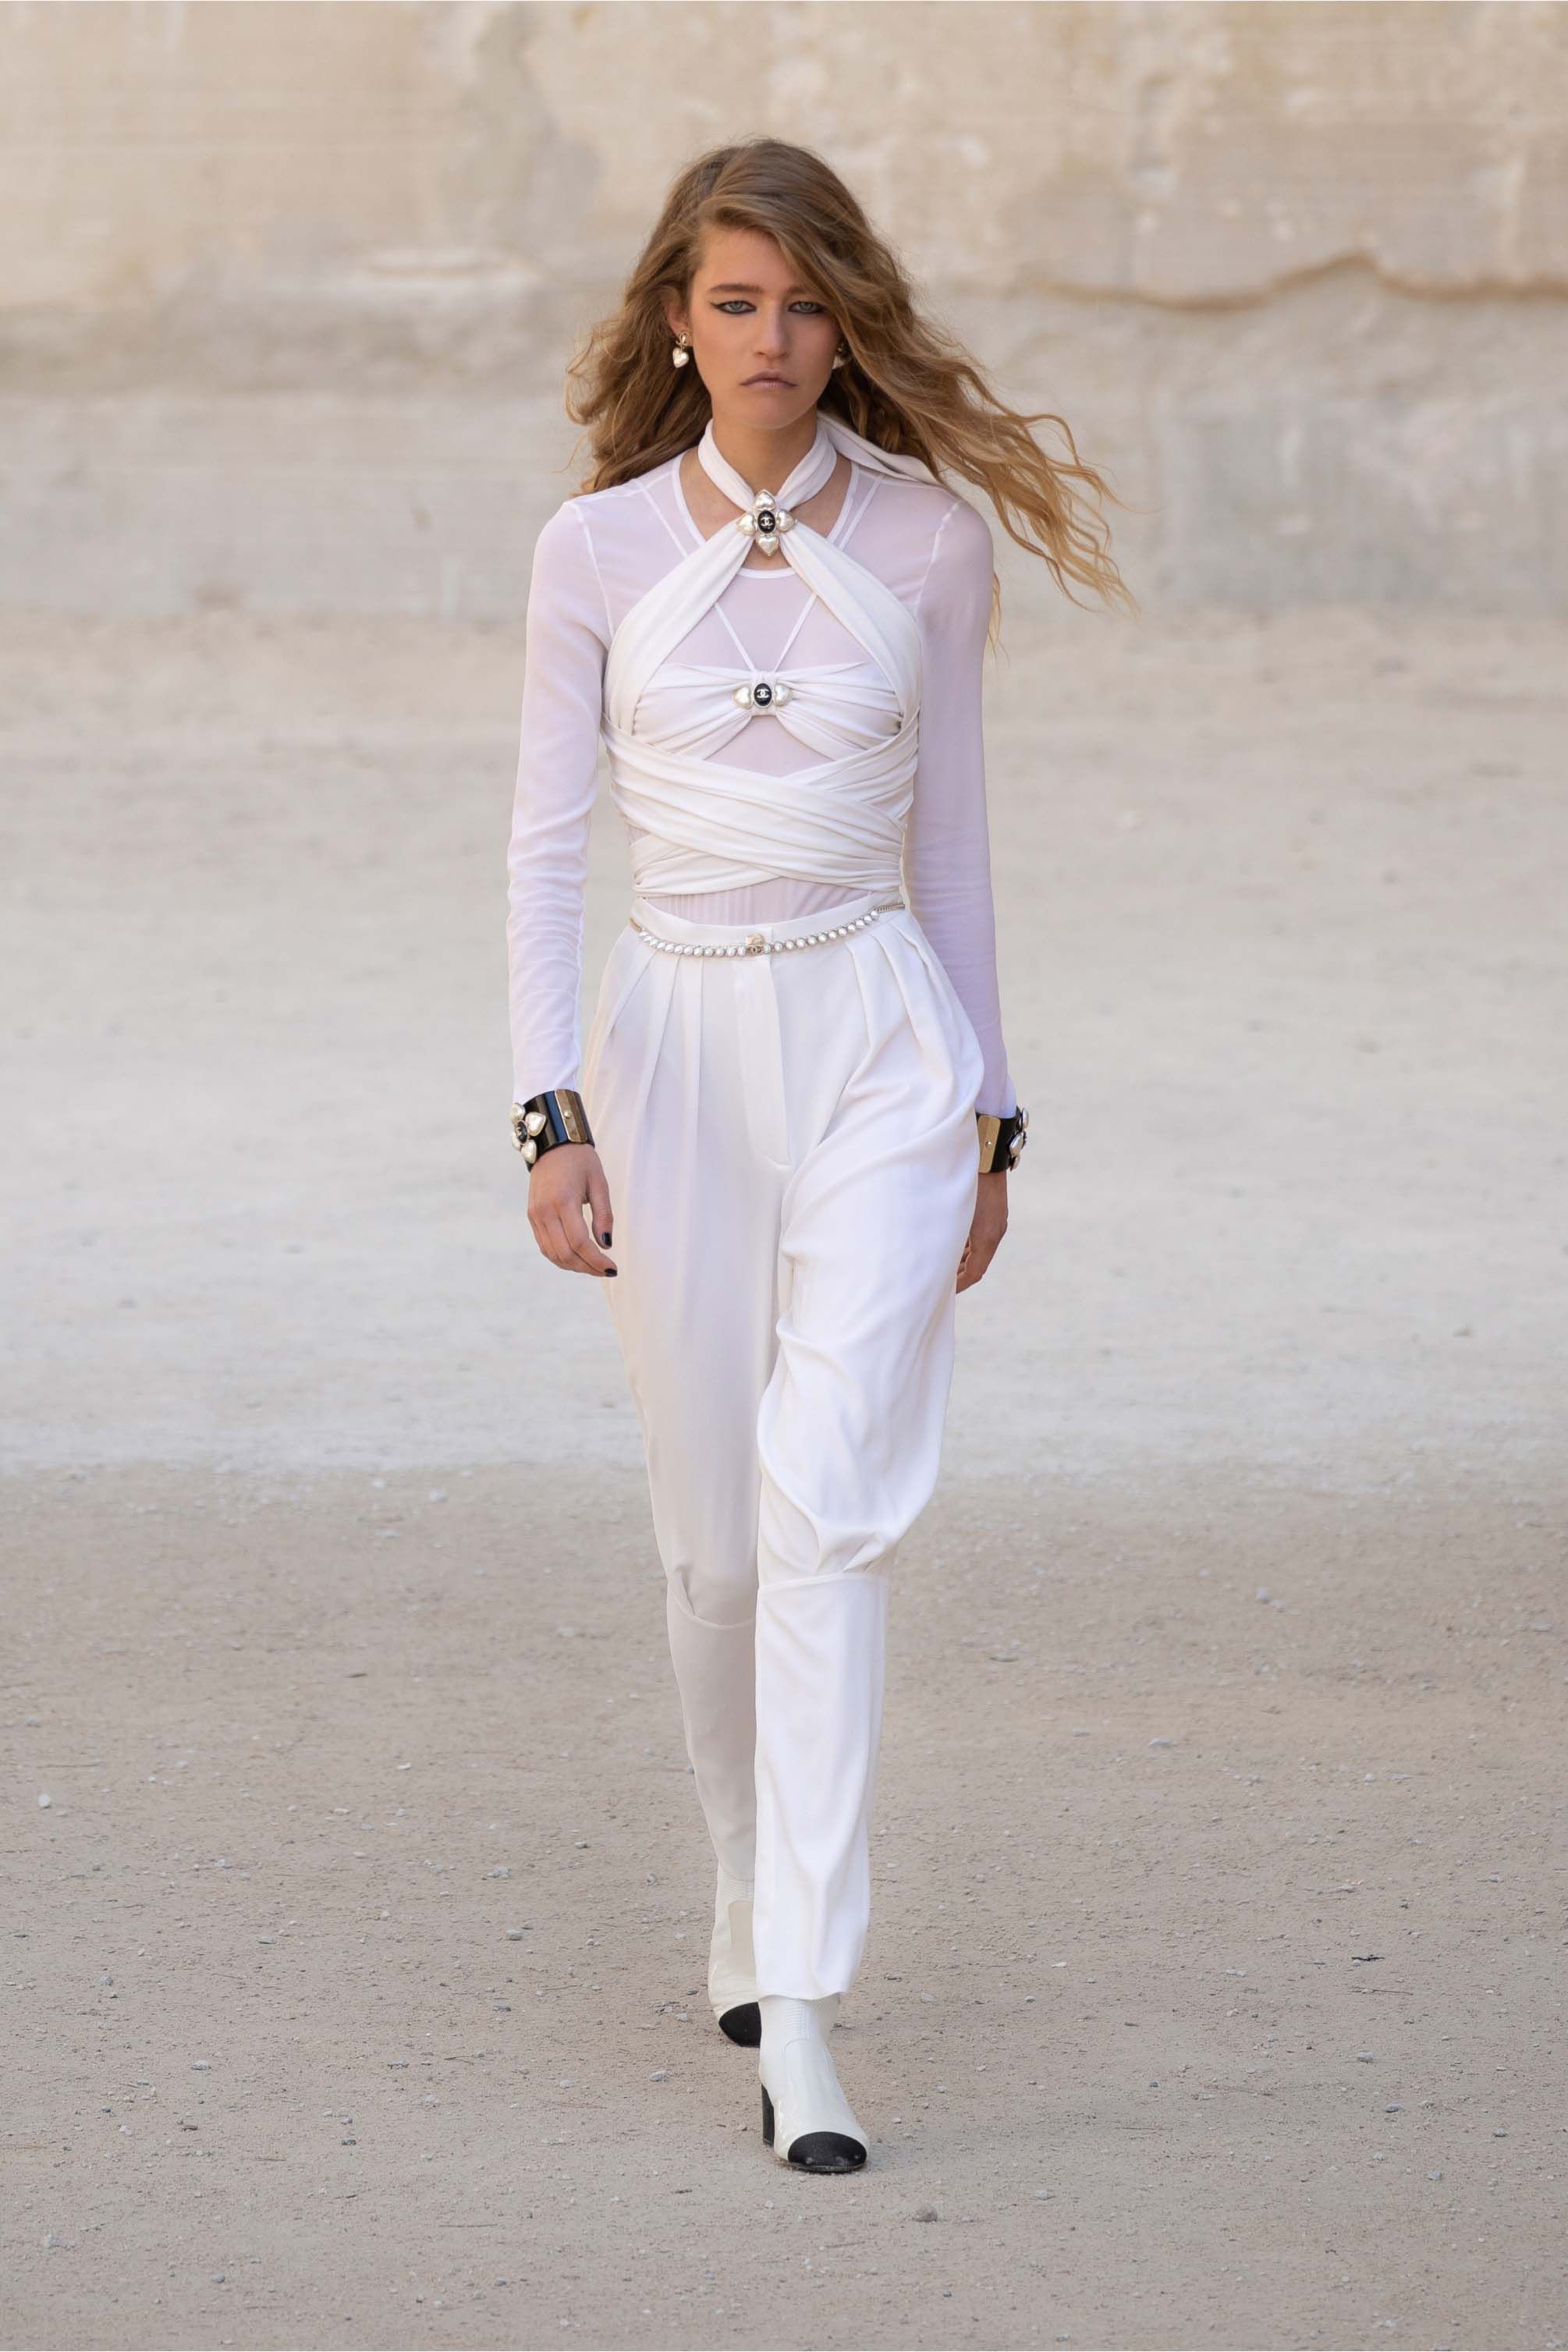 Chanel Cruise 2021 Paris - RUNWAY MAGAZINE ® Collections